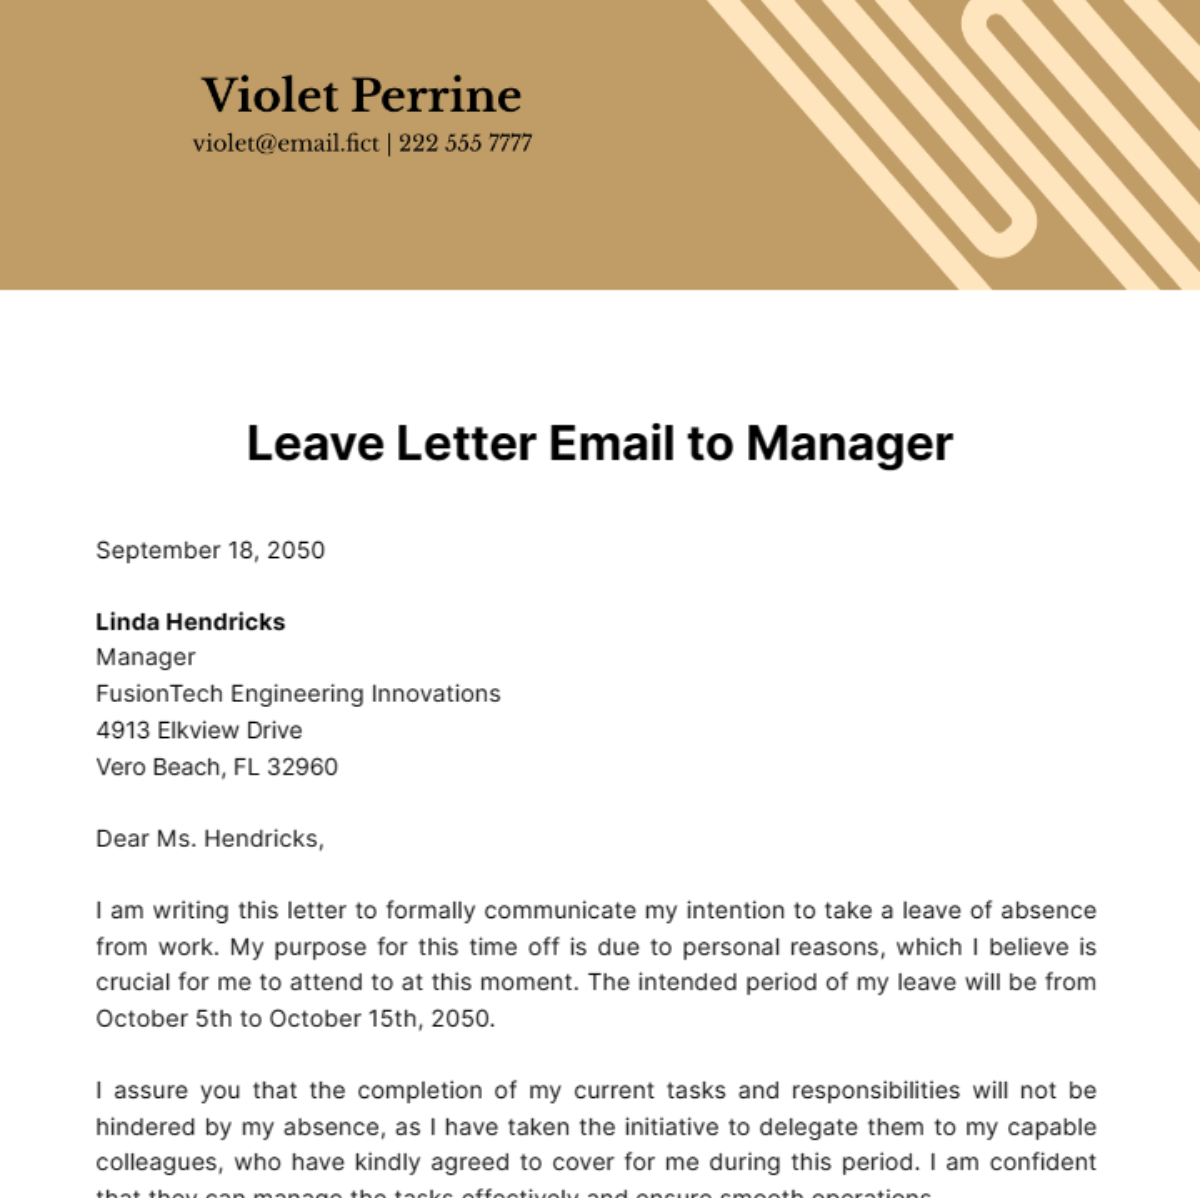 Leave Letter Email to Manager Template